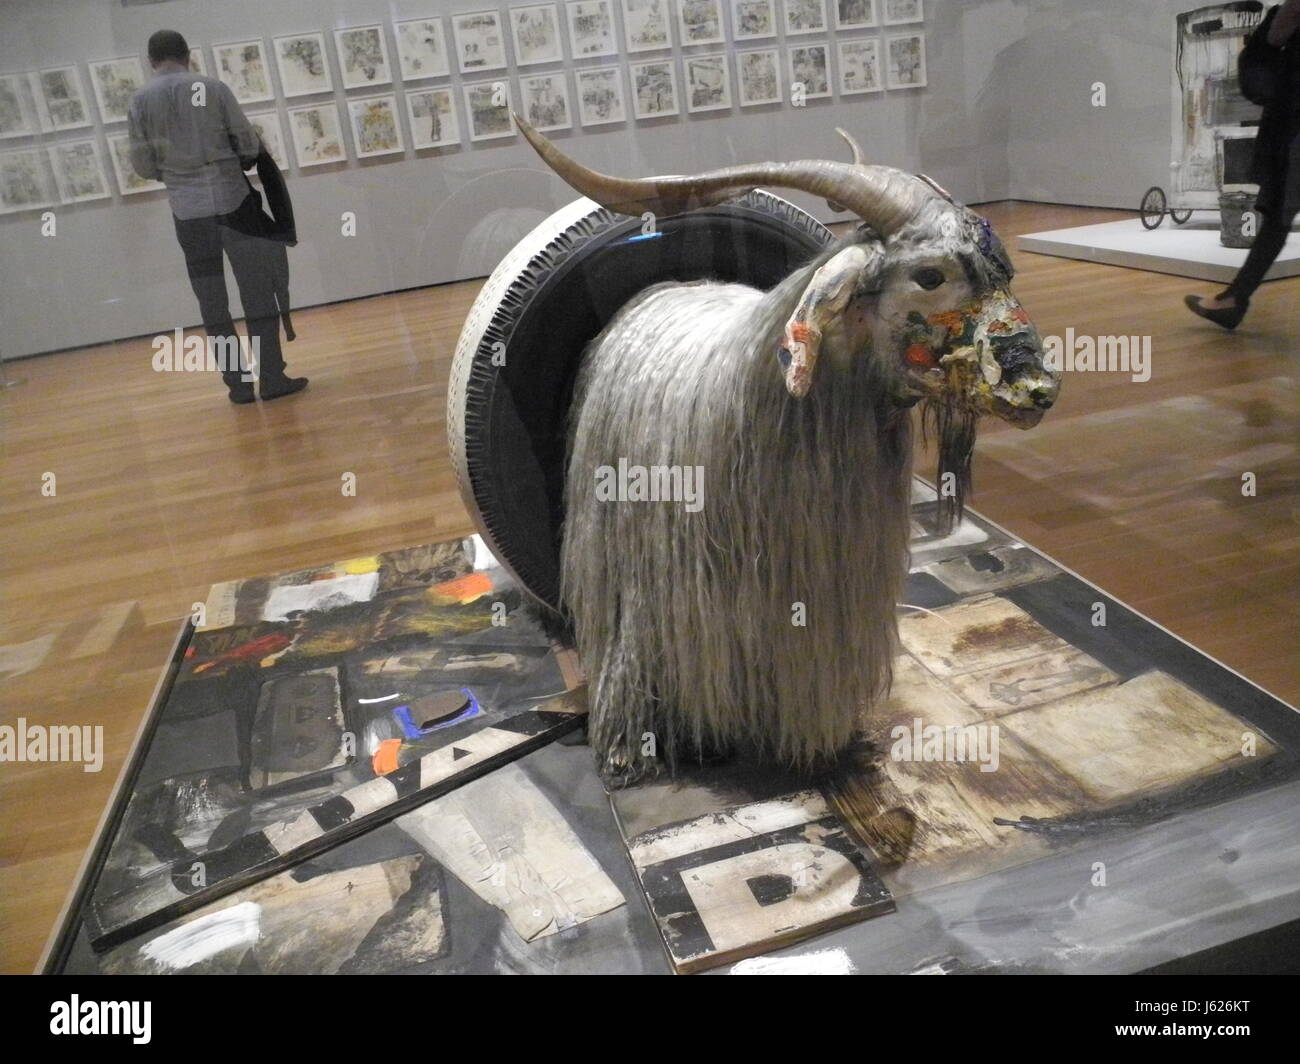 The artwork 'Monogram' by US artist Robert Rauschenberg, part of a retrospective exhibition of Rauschenberg's work which opens on 21 May, at the Museum of Modern Art (MoMA) in New York, 16 May 2017. Photo: Johannes Schmitt-Tegge/dpa Stock Photo